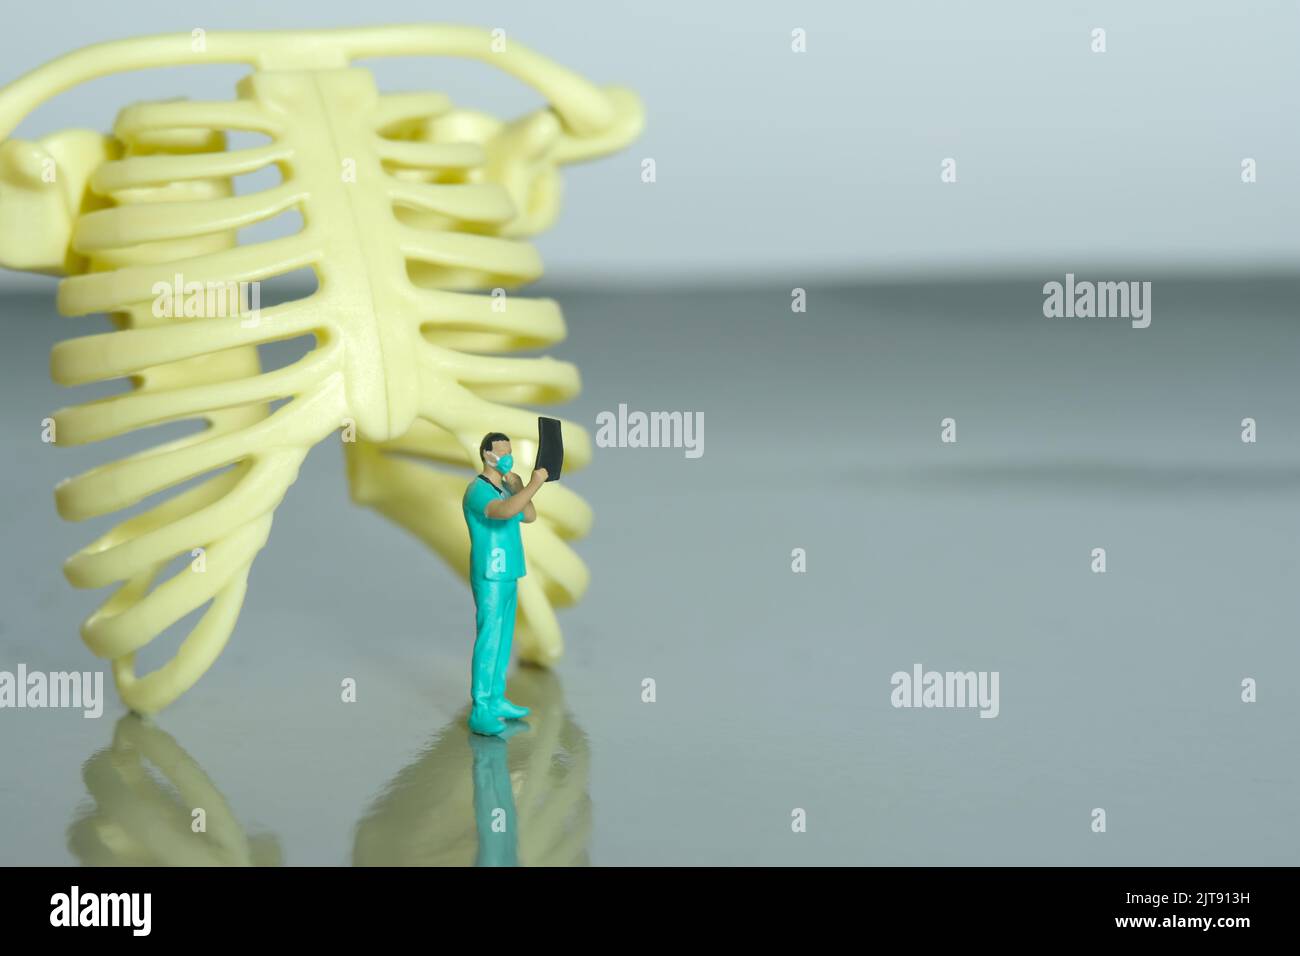 Miniature people toy figure photography. A doctor nurse observing on x ray result scan film in front of rib bone skeleton. Image photo Stock Photo